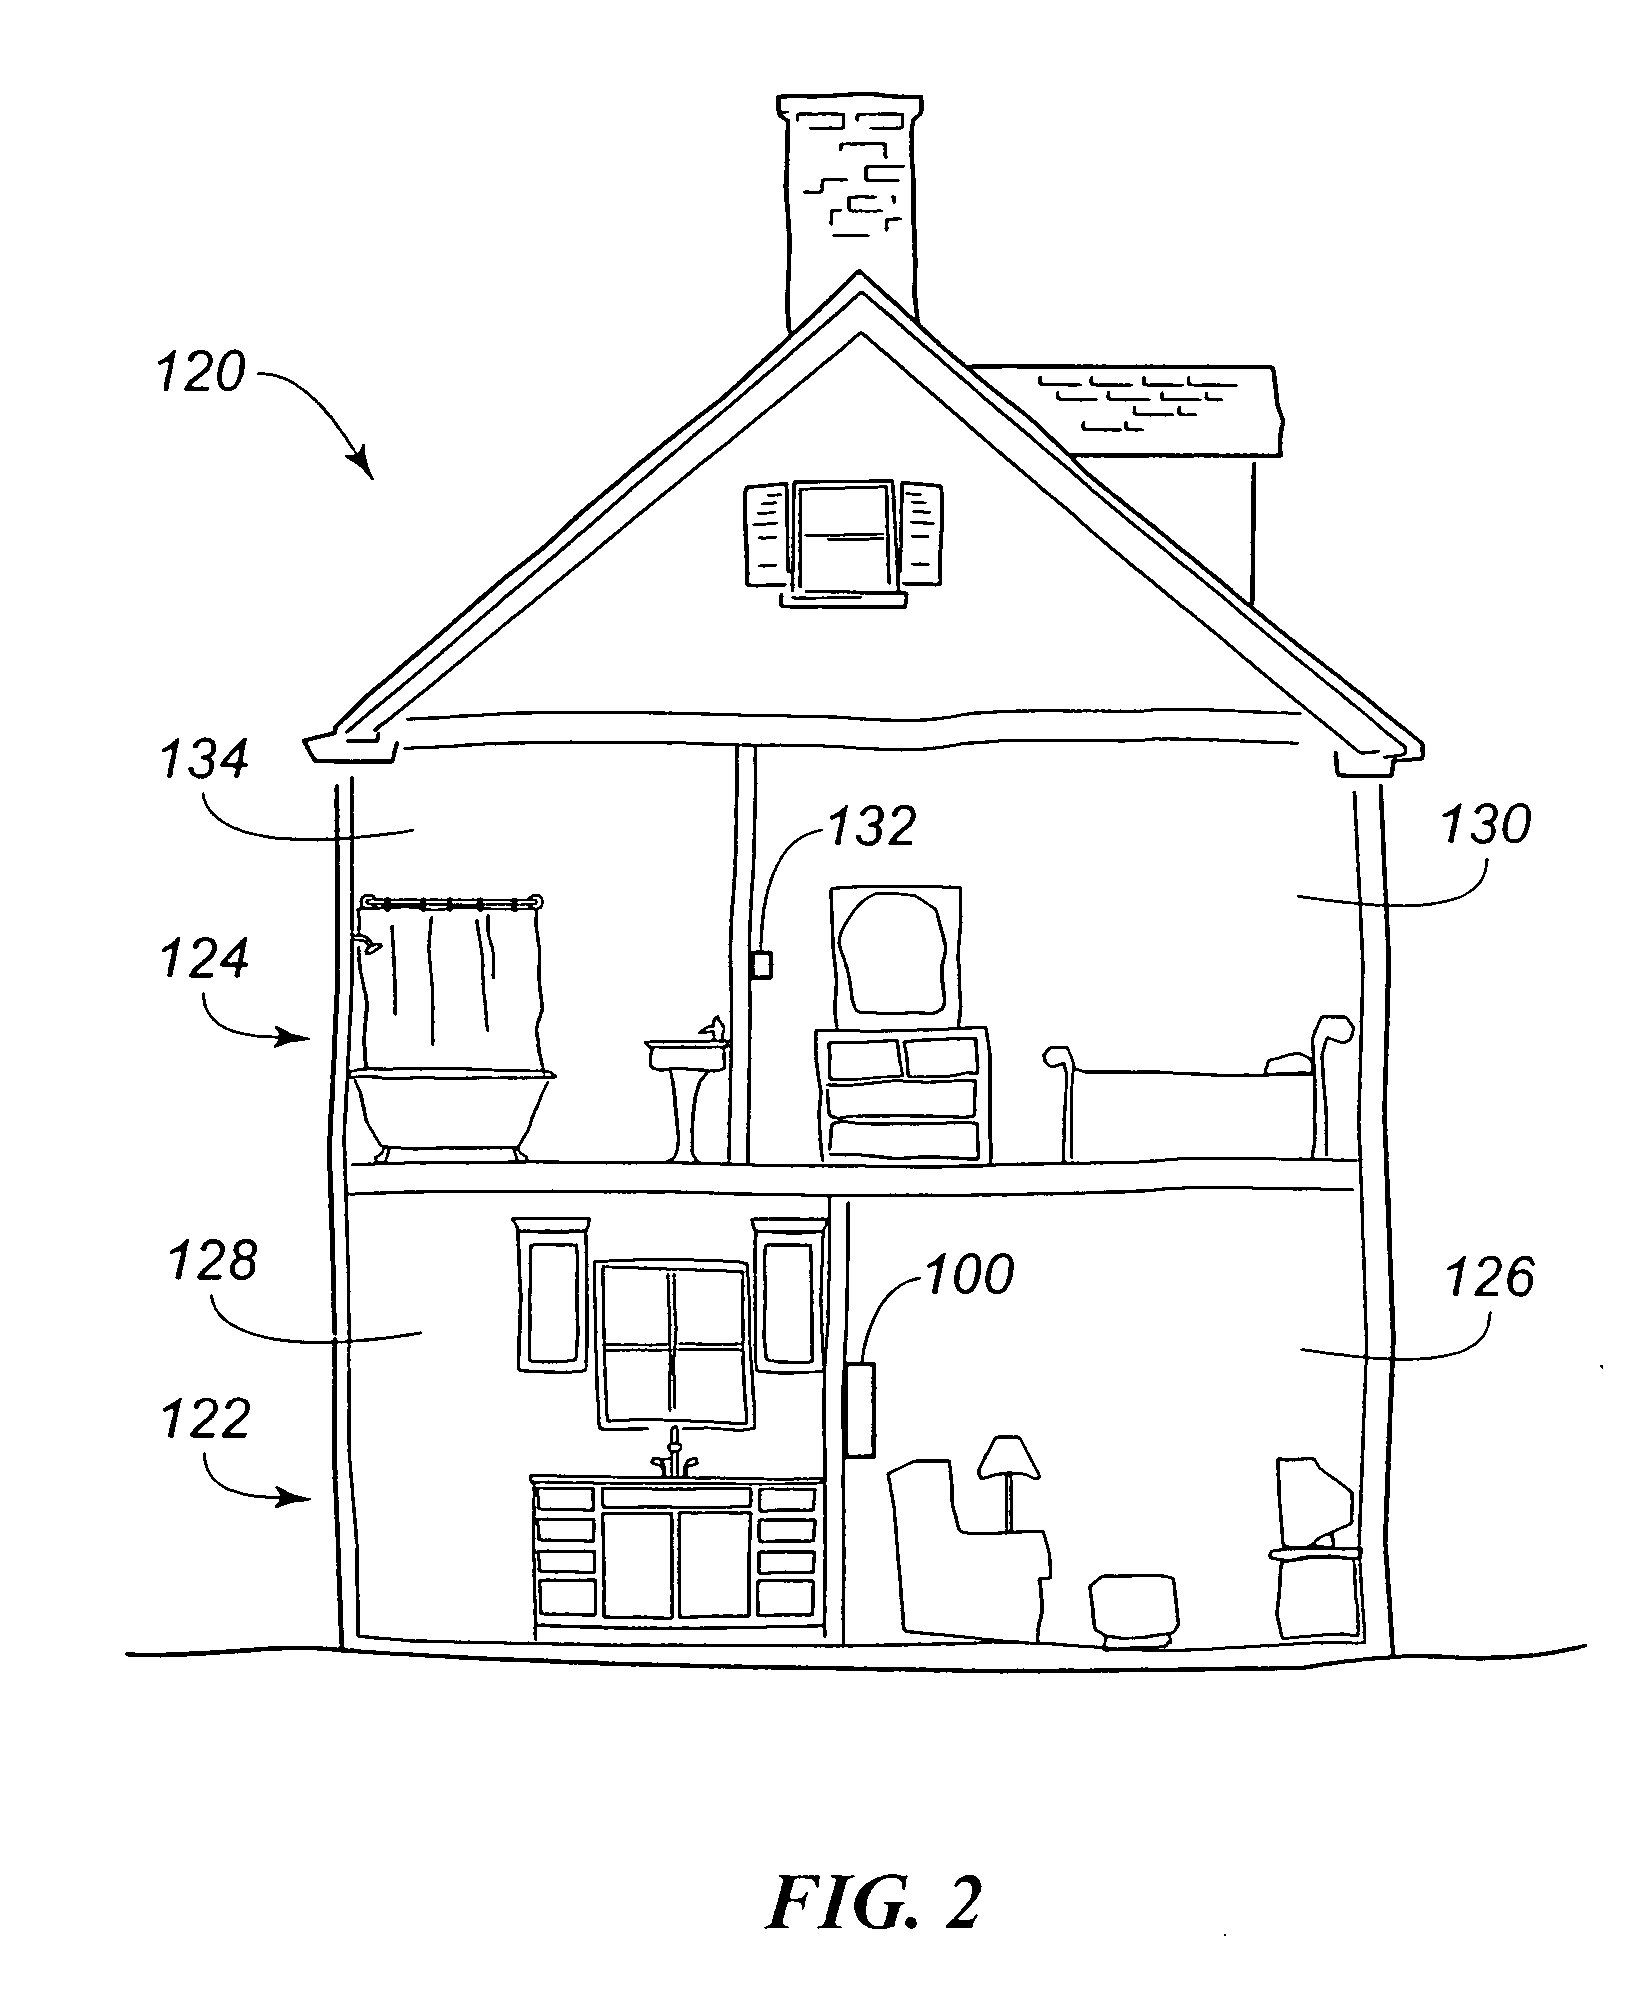 Occupancy-based zoning climate control system and method